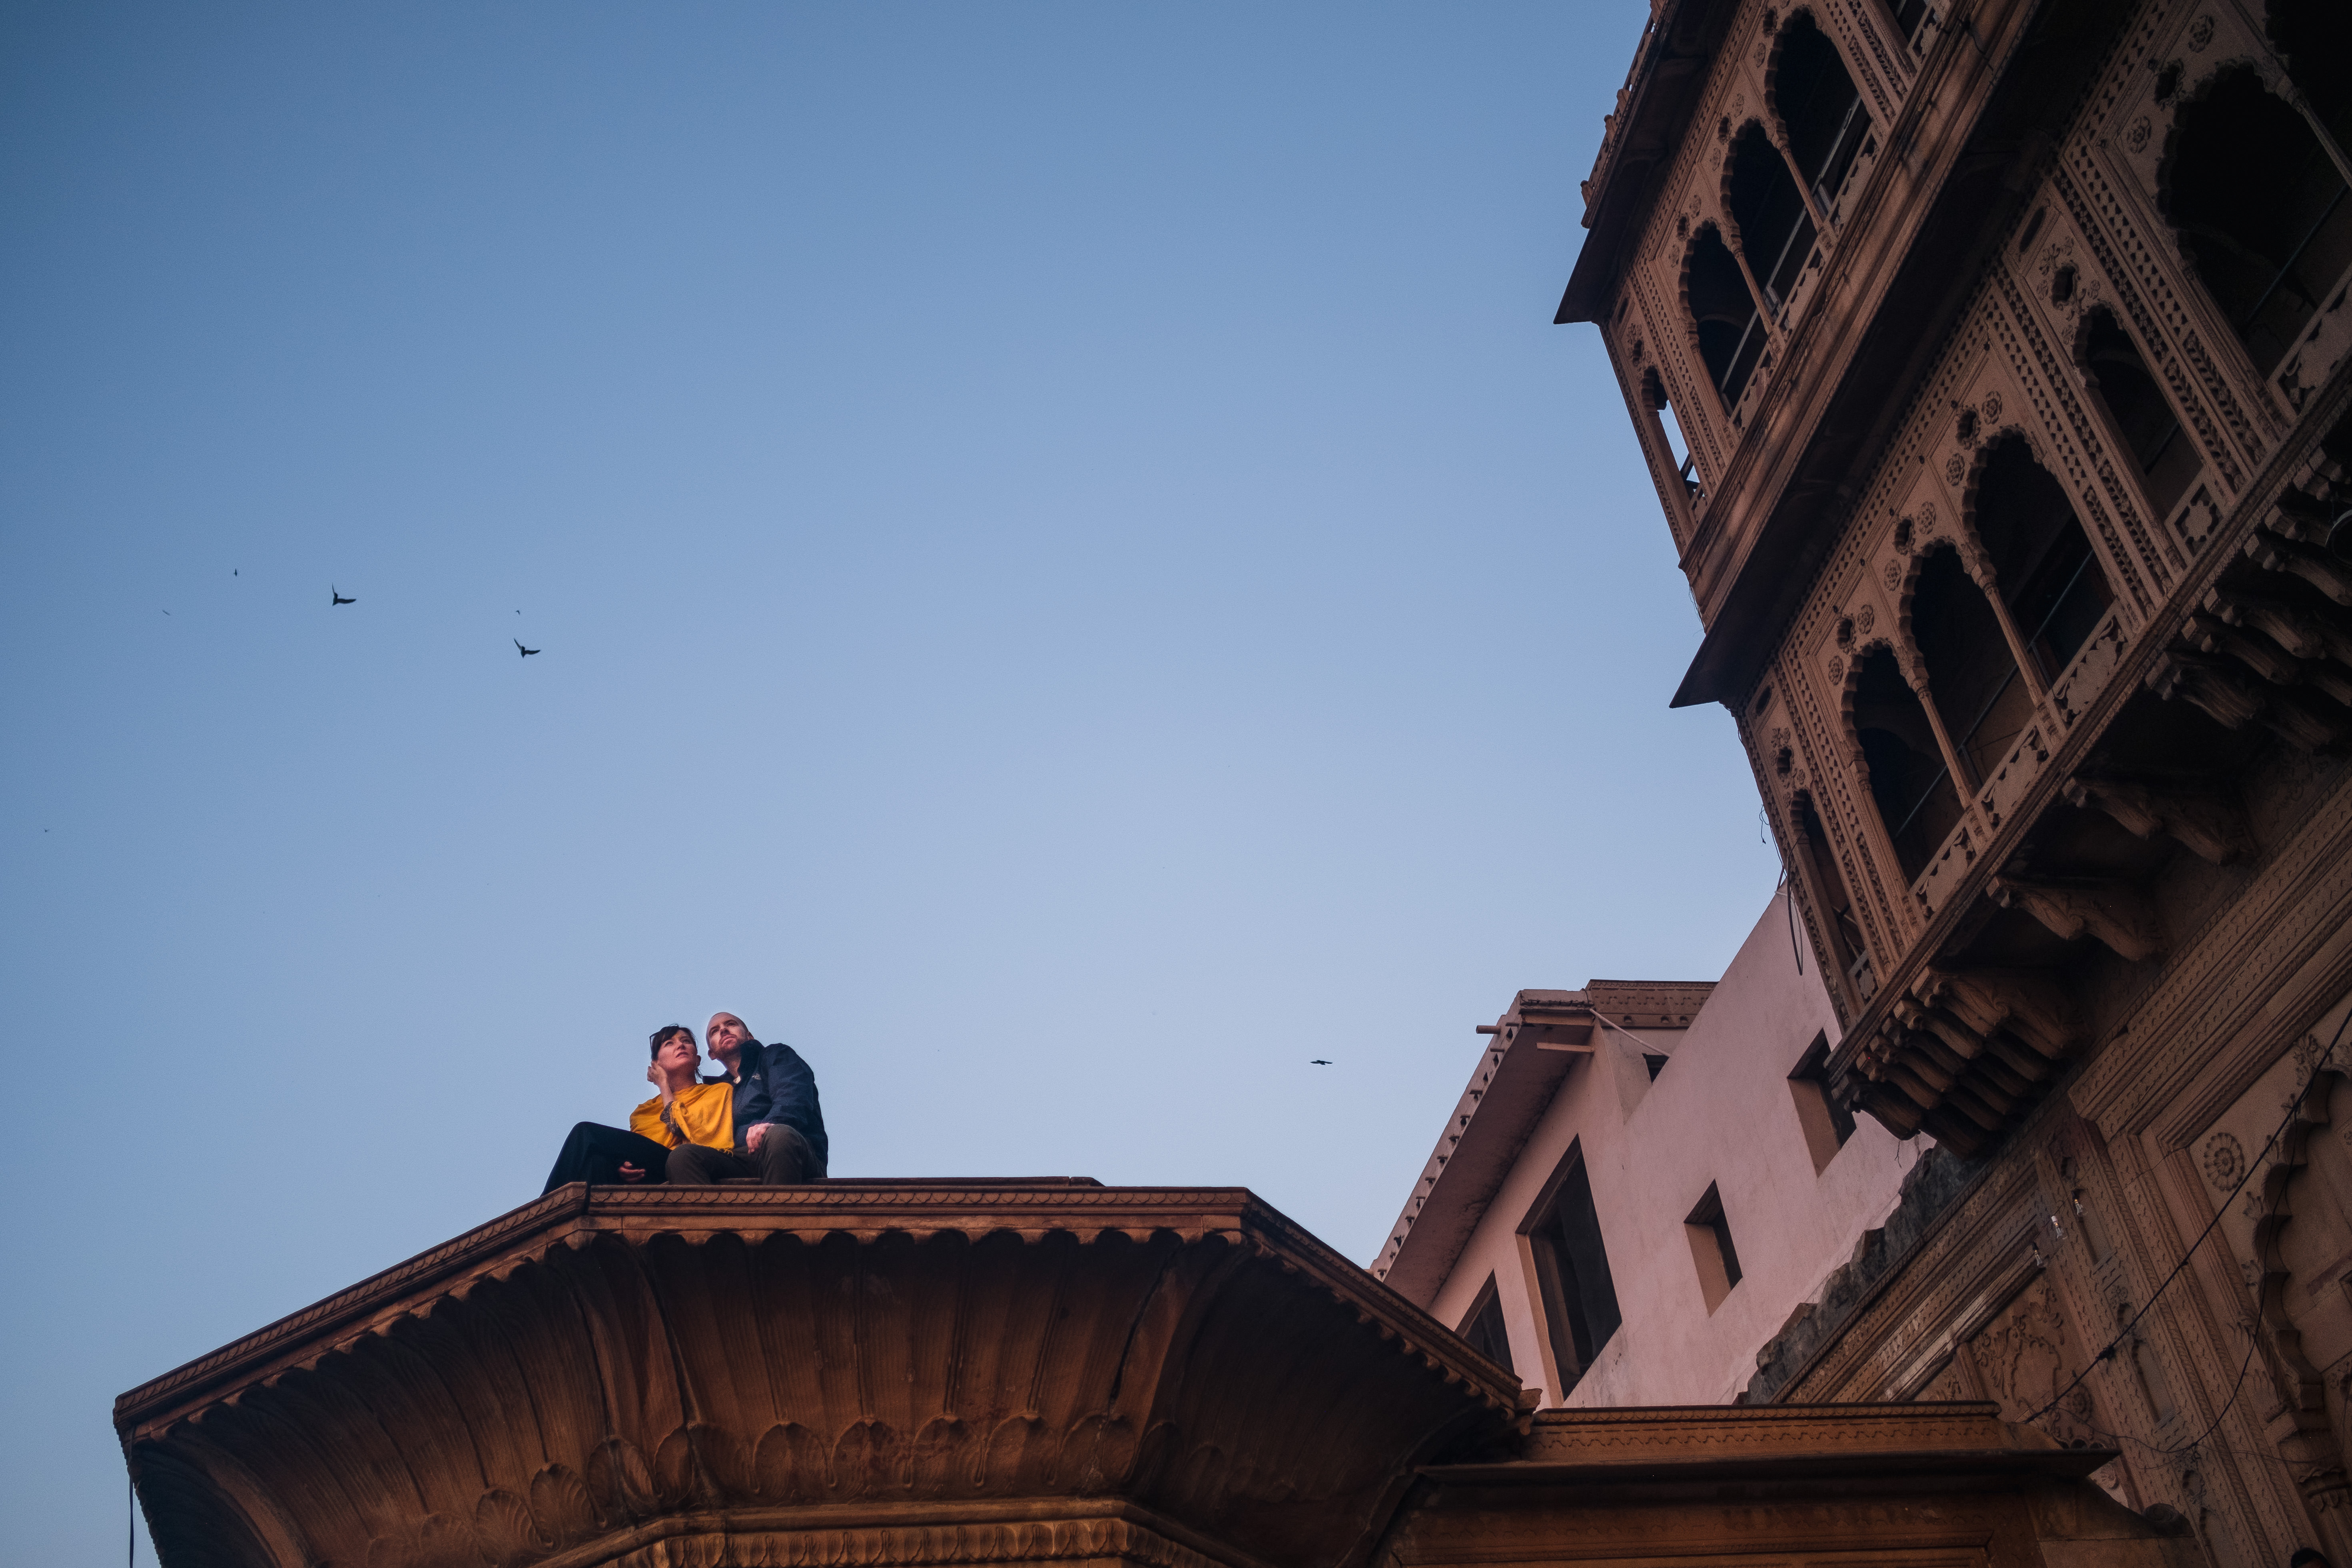 India Street Photography During Holi Festival. couple sits on a pillar and watches the festival. Images by Jason Vinson